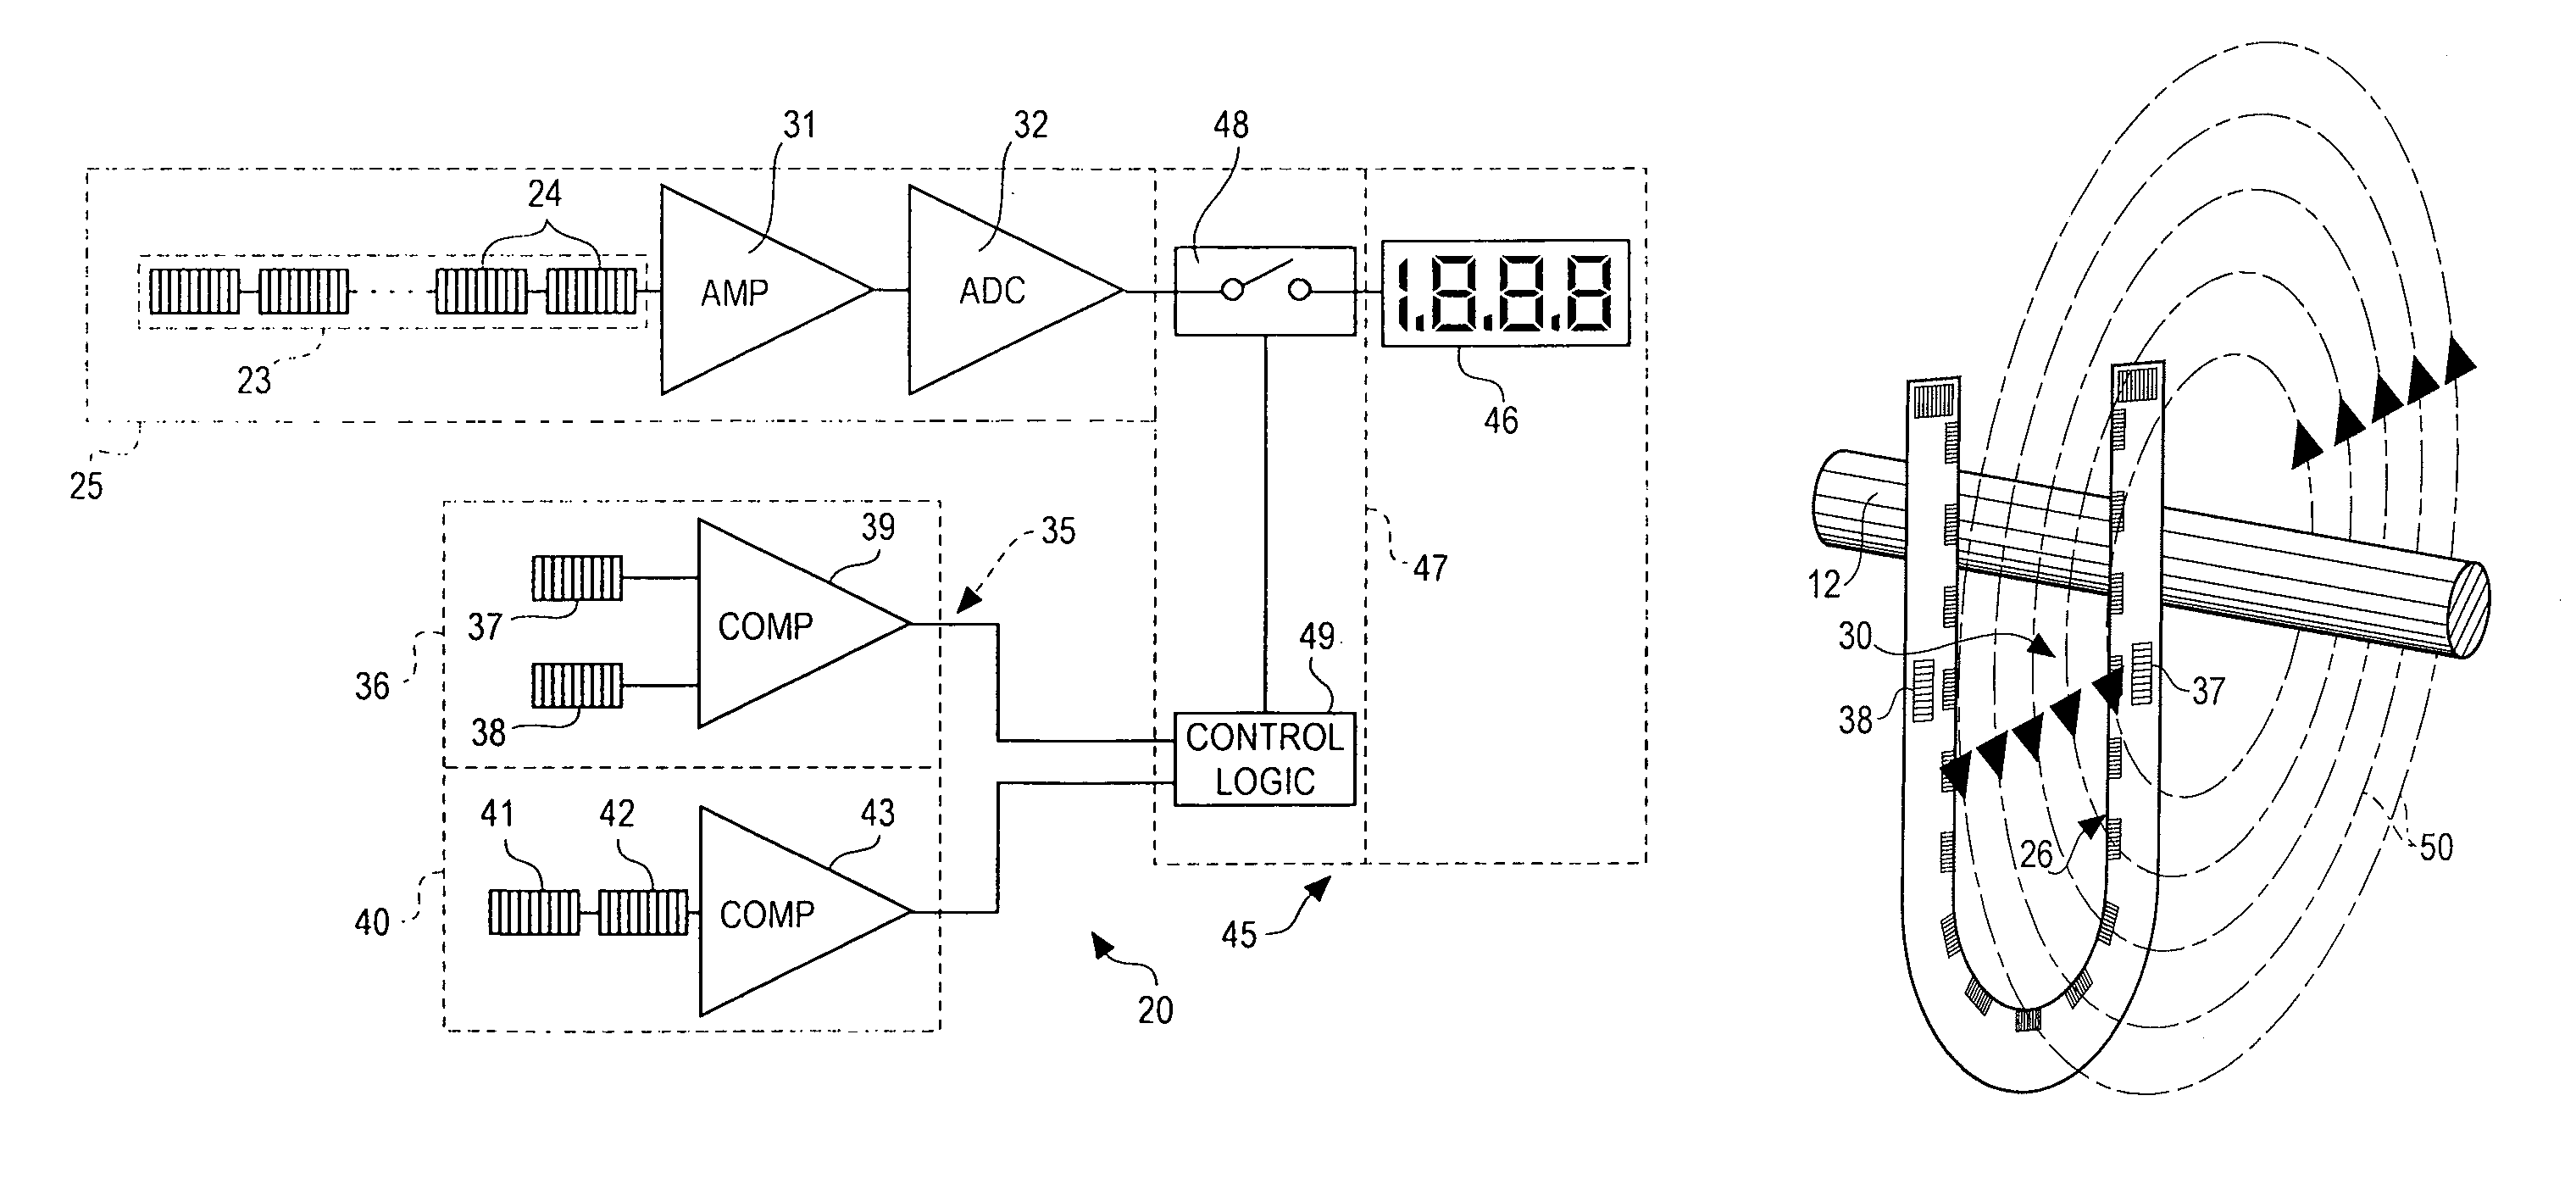 Ammeter with improved current sensing